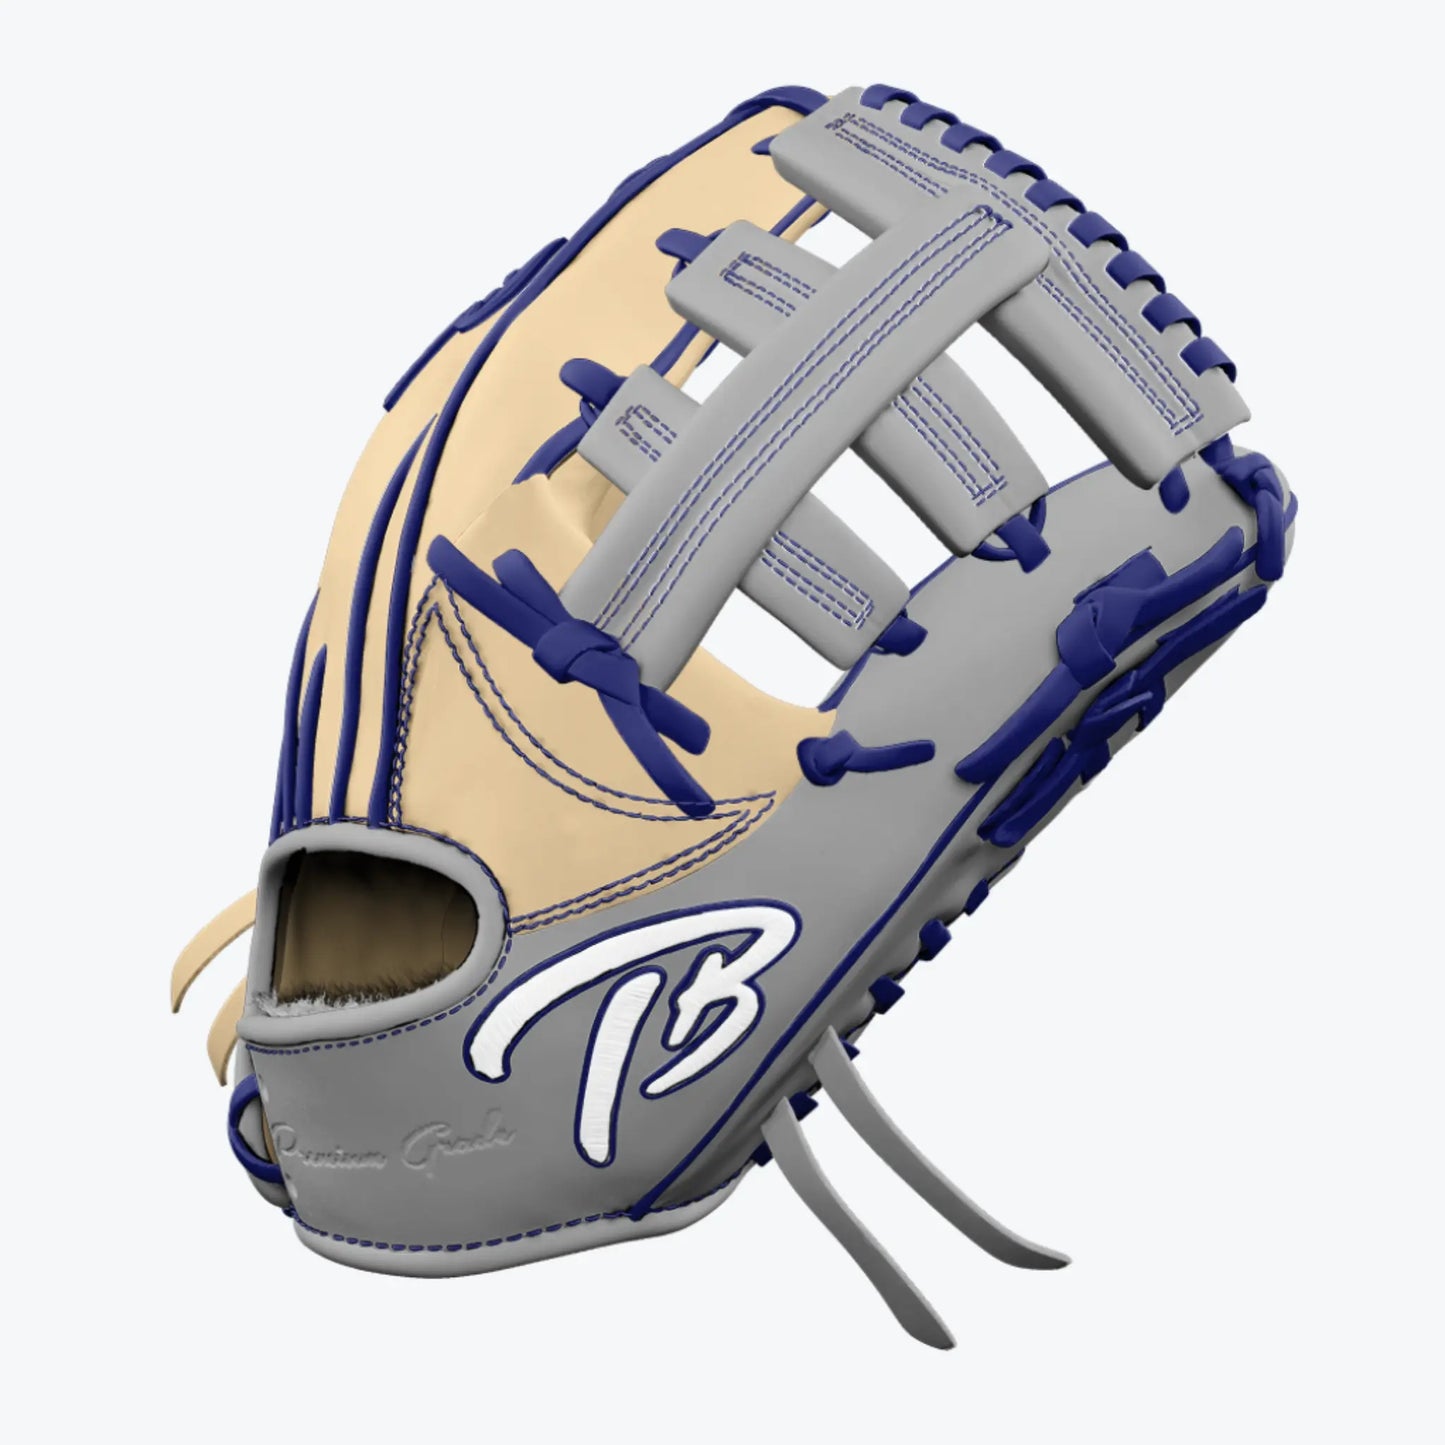 Custom double post outfield baseball glove by Tater in cream and navy blue, featuring a prominent TB logo, designed for superior fielding performance and durability, side view.